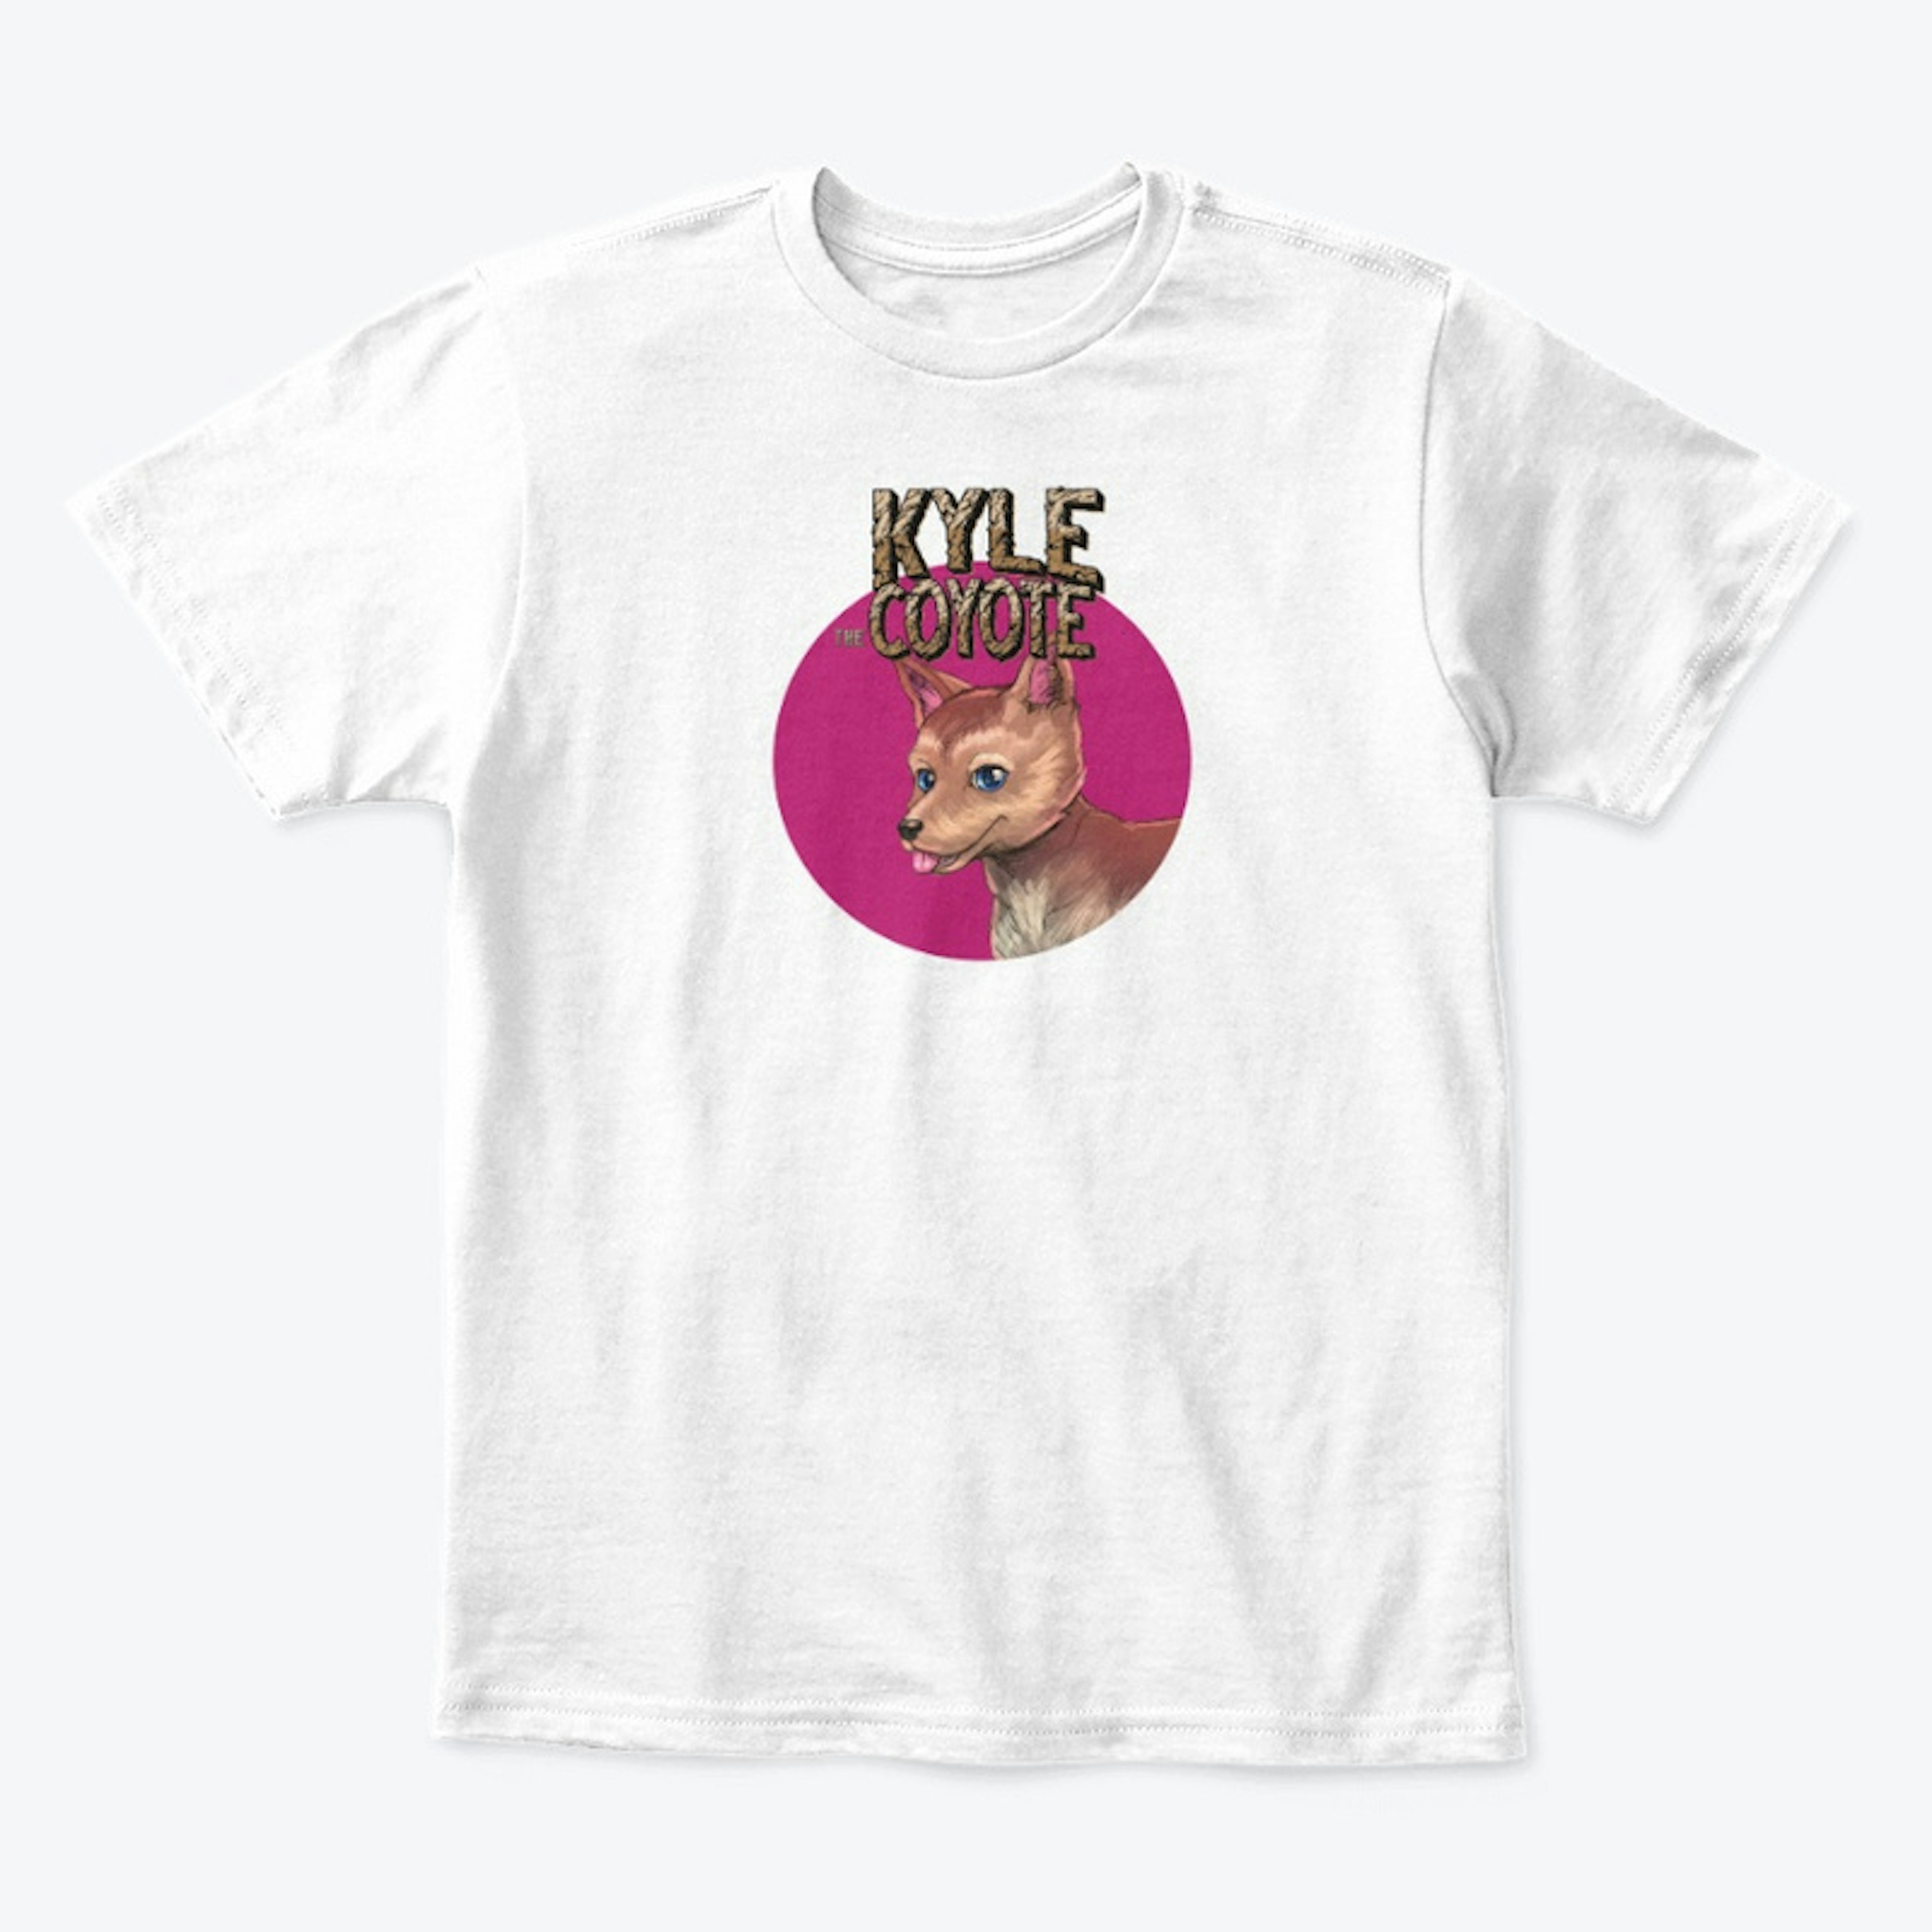 Kyle the Coyote T-Shirt